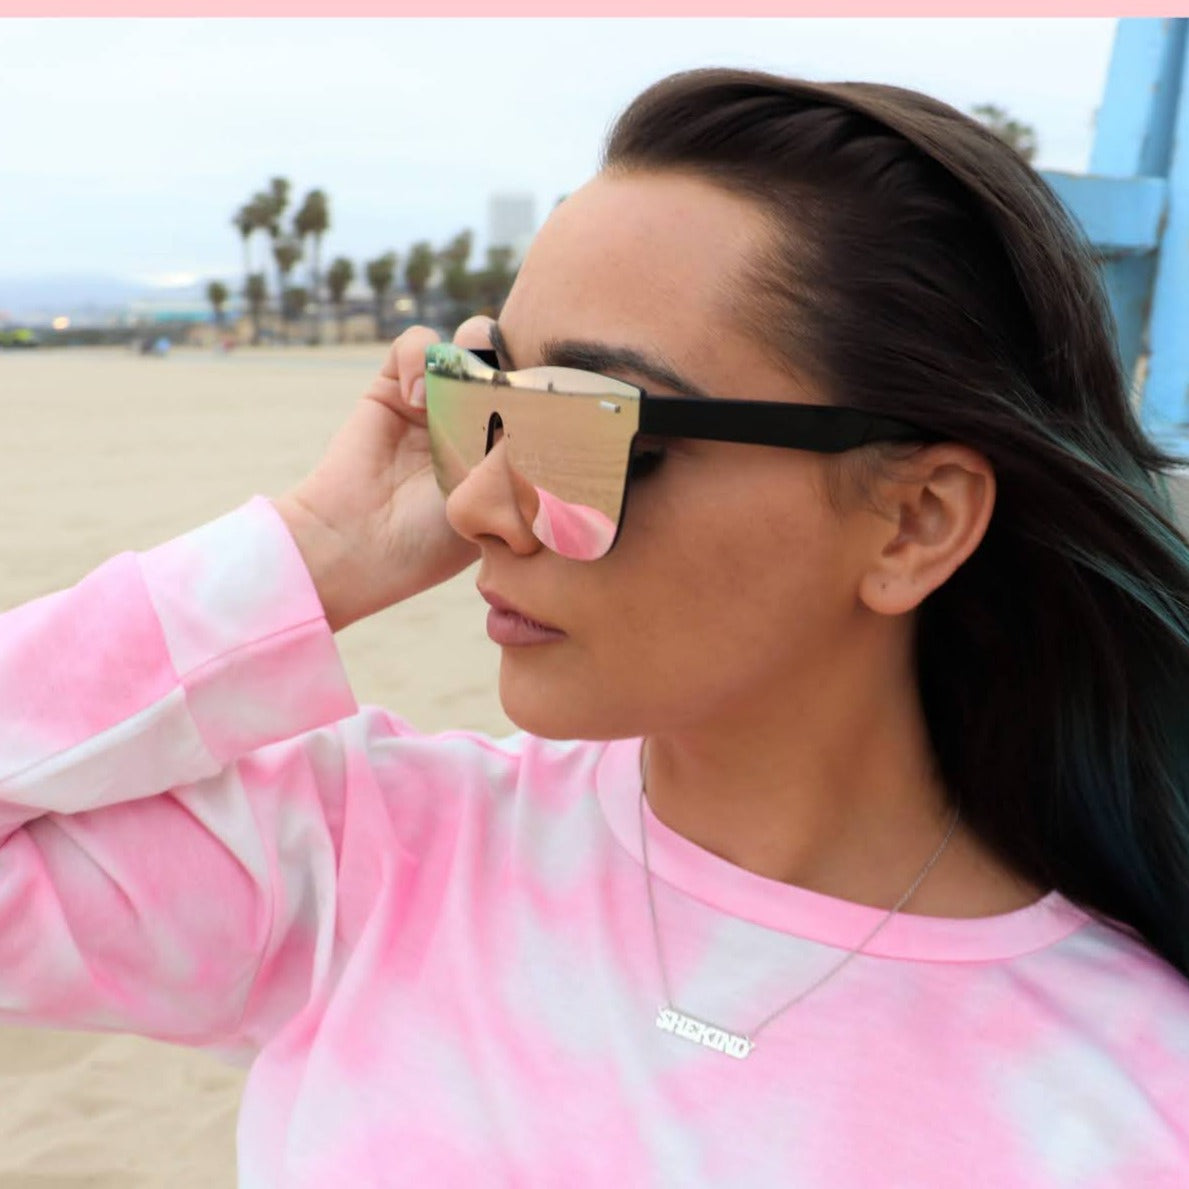 brunette woman on beach in pink tie dye shirt and sunglasses wearing a nameplate necklace that says shekind